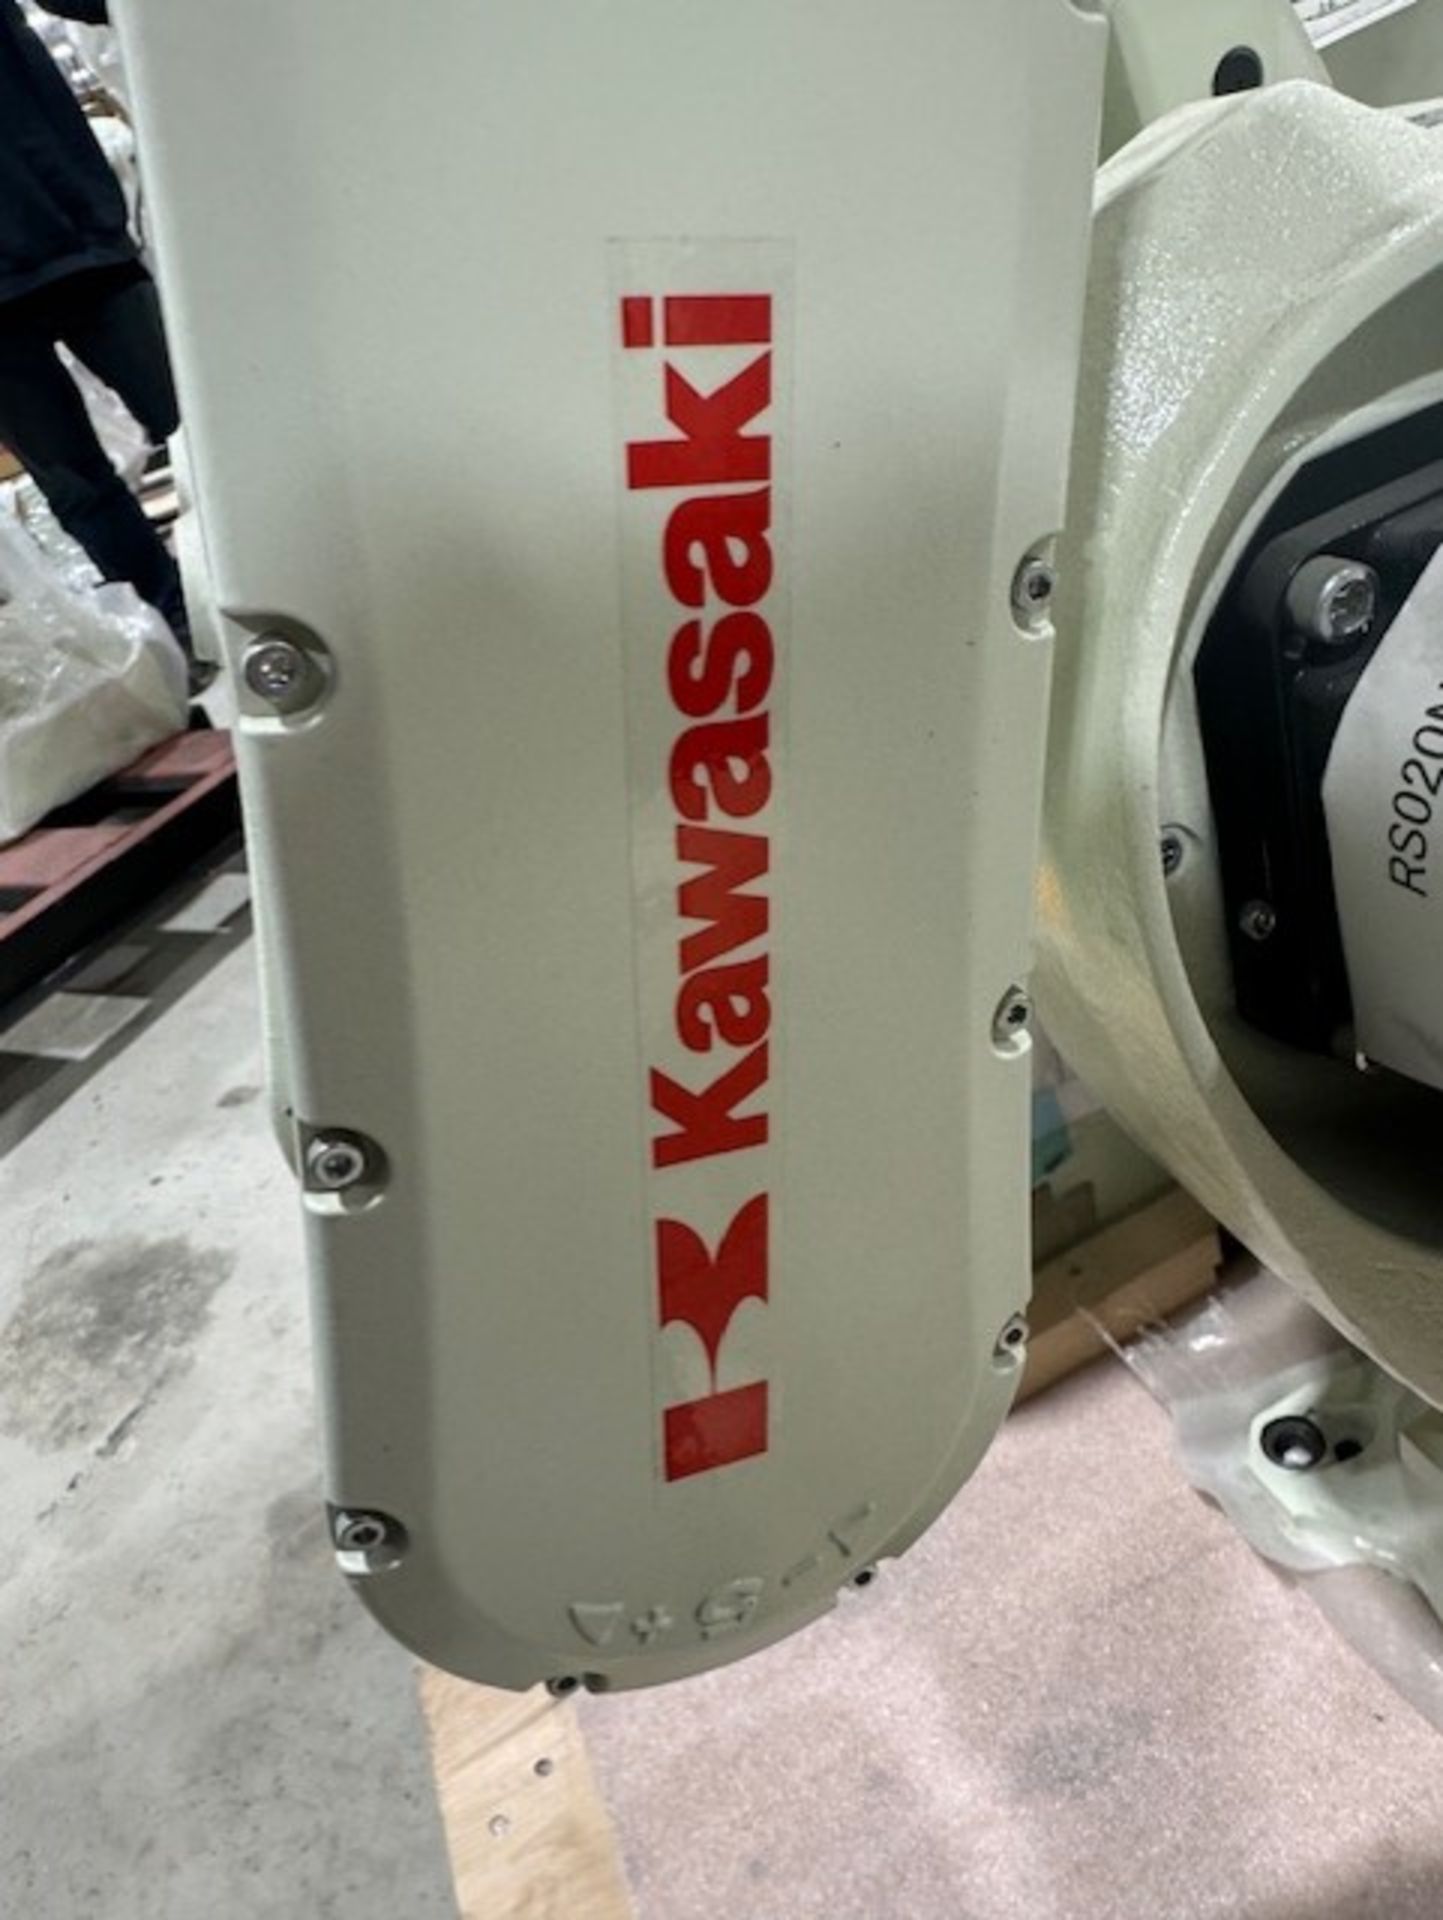 NEW KAWASAKI ROBOT MODEL RS020N, SN 4715, 20KG X 1725MM REACH WITH EO1 CONTROLS, CABLES & TEACH - Image 5 of 7